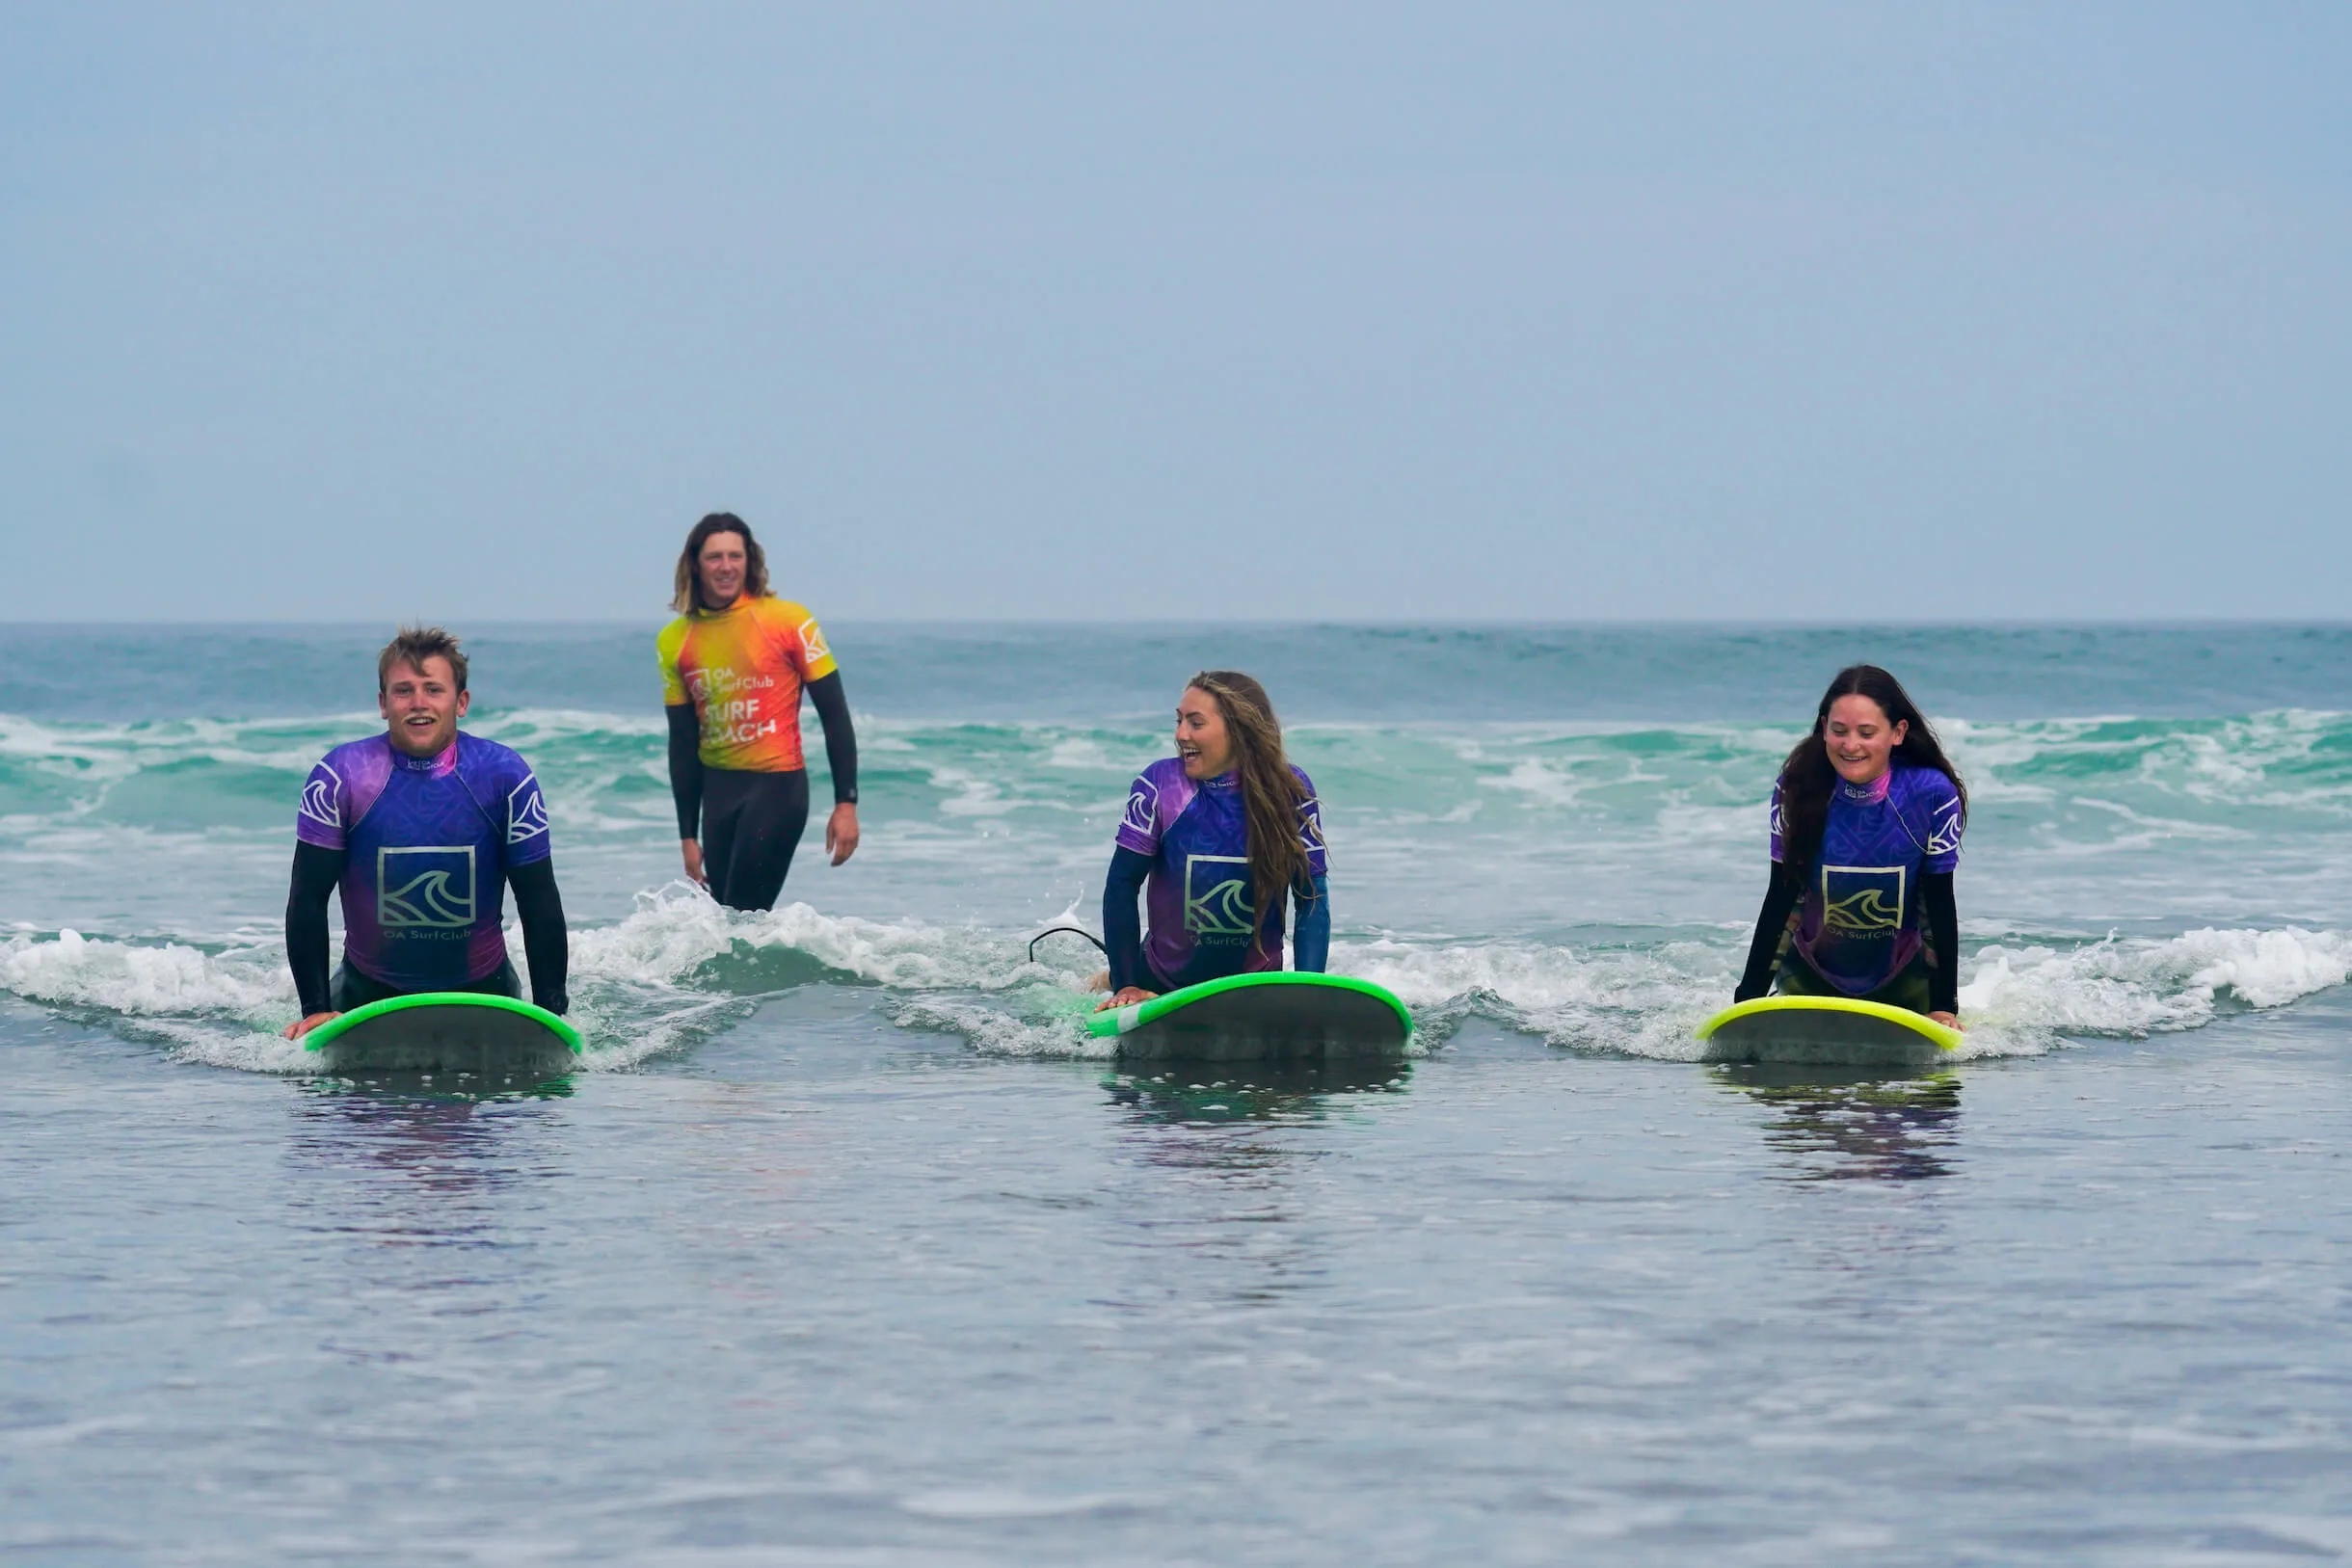 Surfers learning to catch a wave in prone position with a surf coach at Widemouth Bay, Bude